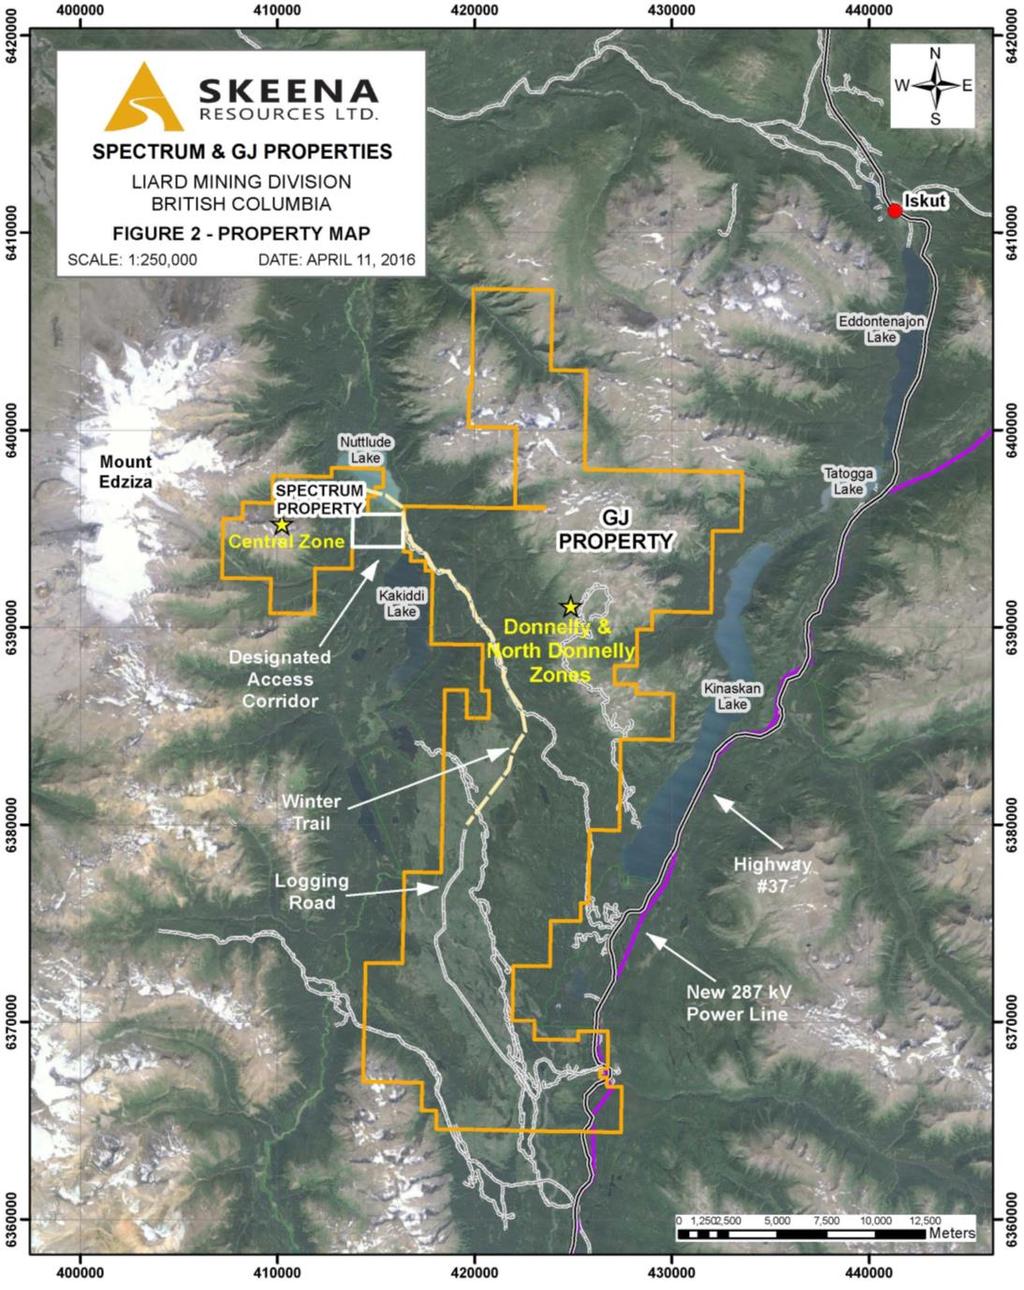 Spectrum-GJ Project Locations Located in the prolific Golden Triangle of northwestern BC which hosts other worldclass gold and gold-copper mines and projects including Brucejack (Pretivm), Galore